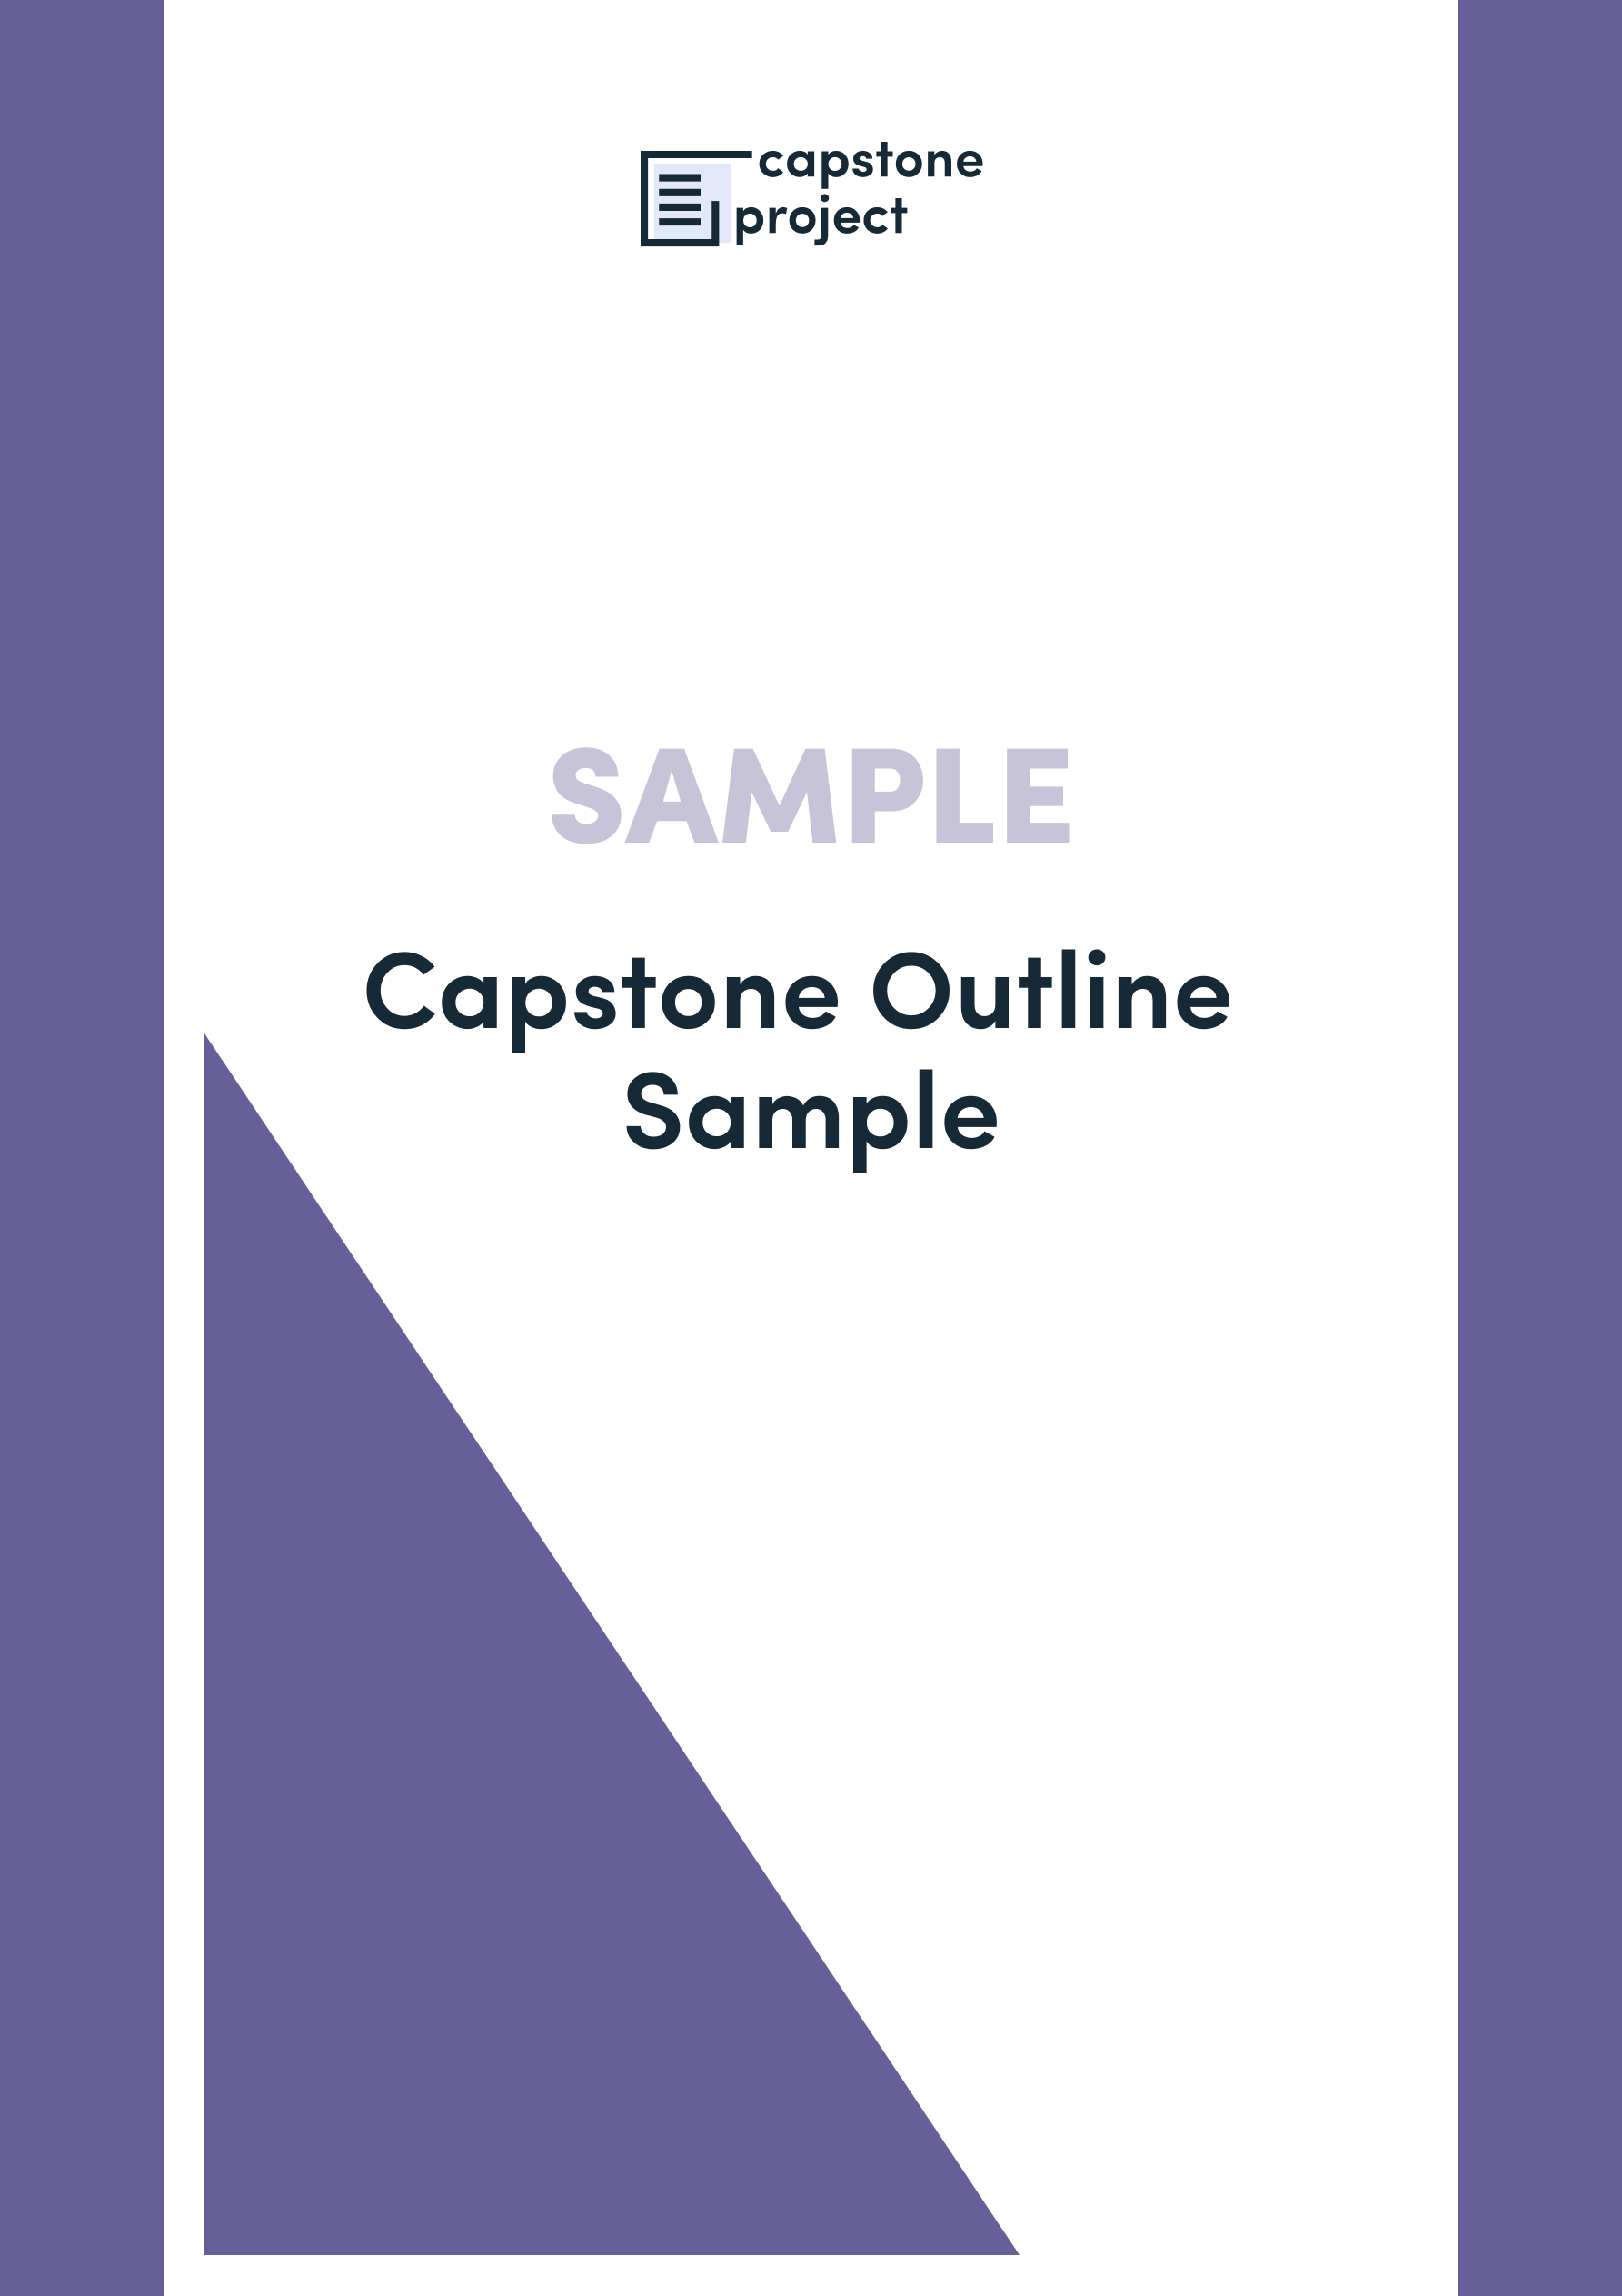 senior capstone project examples for high school